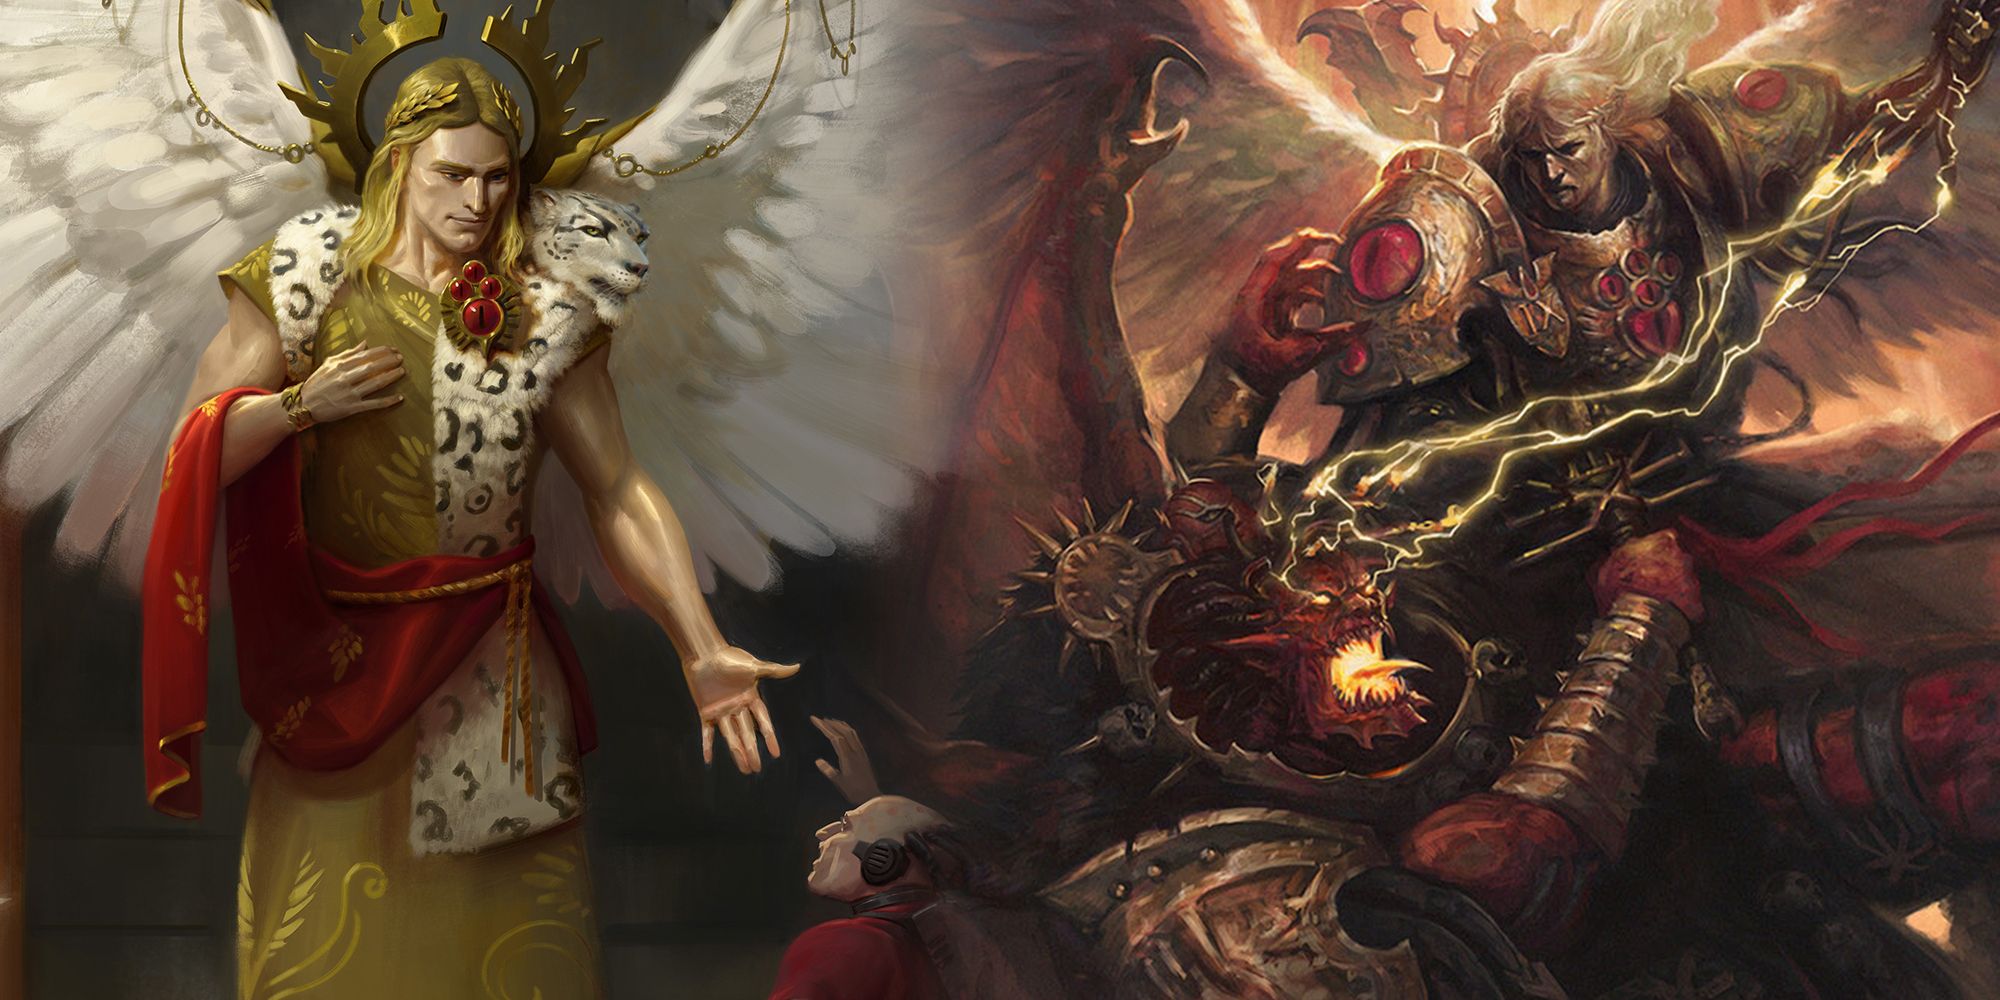 Warhammer 40k - Two Images Of Sanguinius Both In Combat And Out Of ARmor